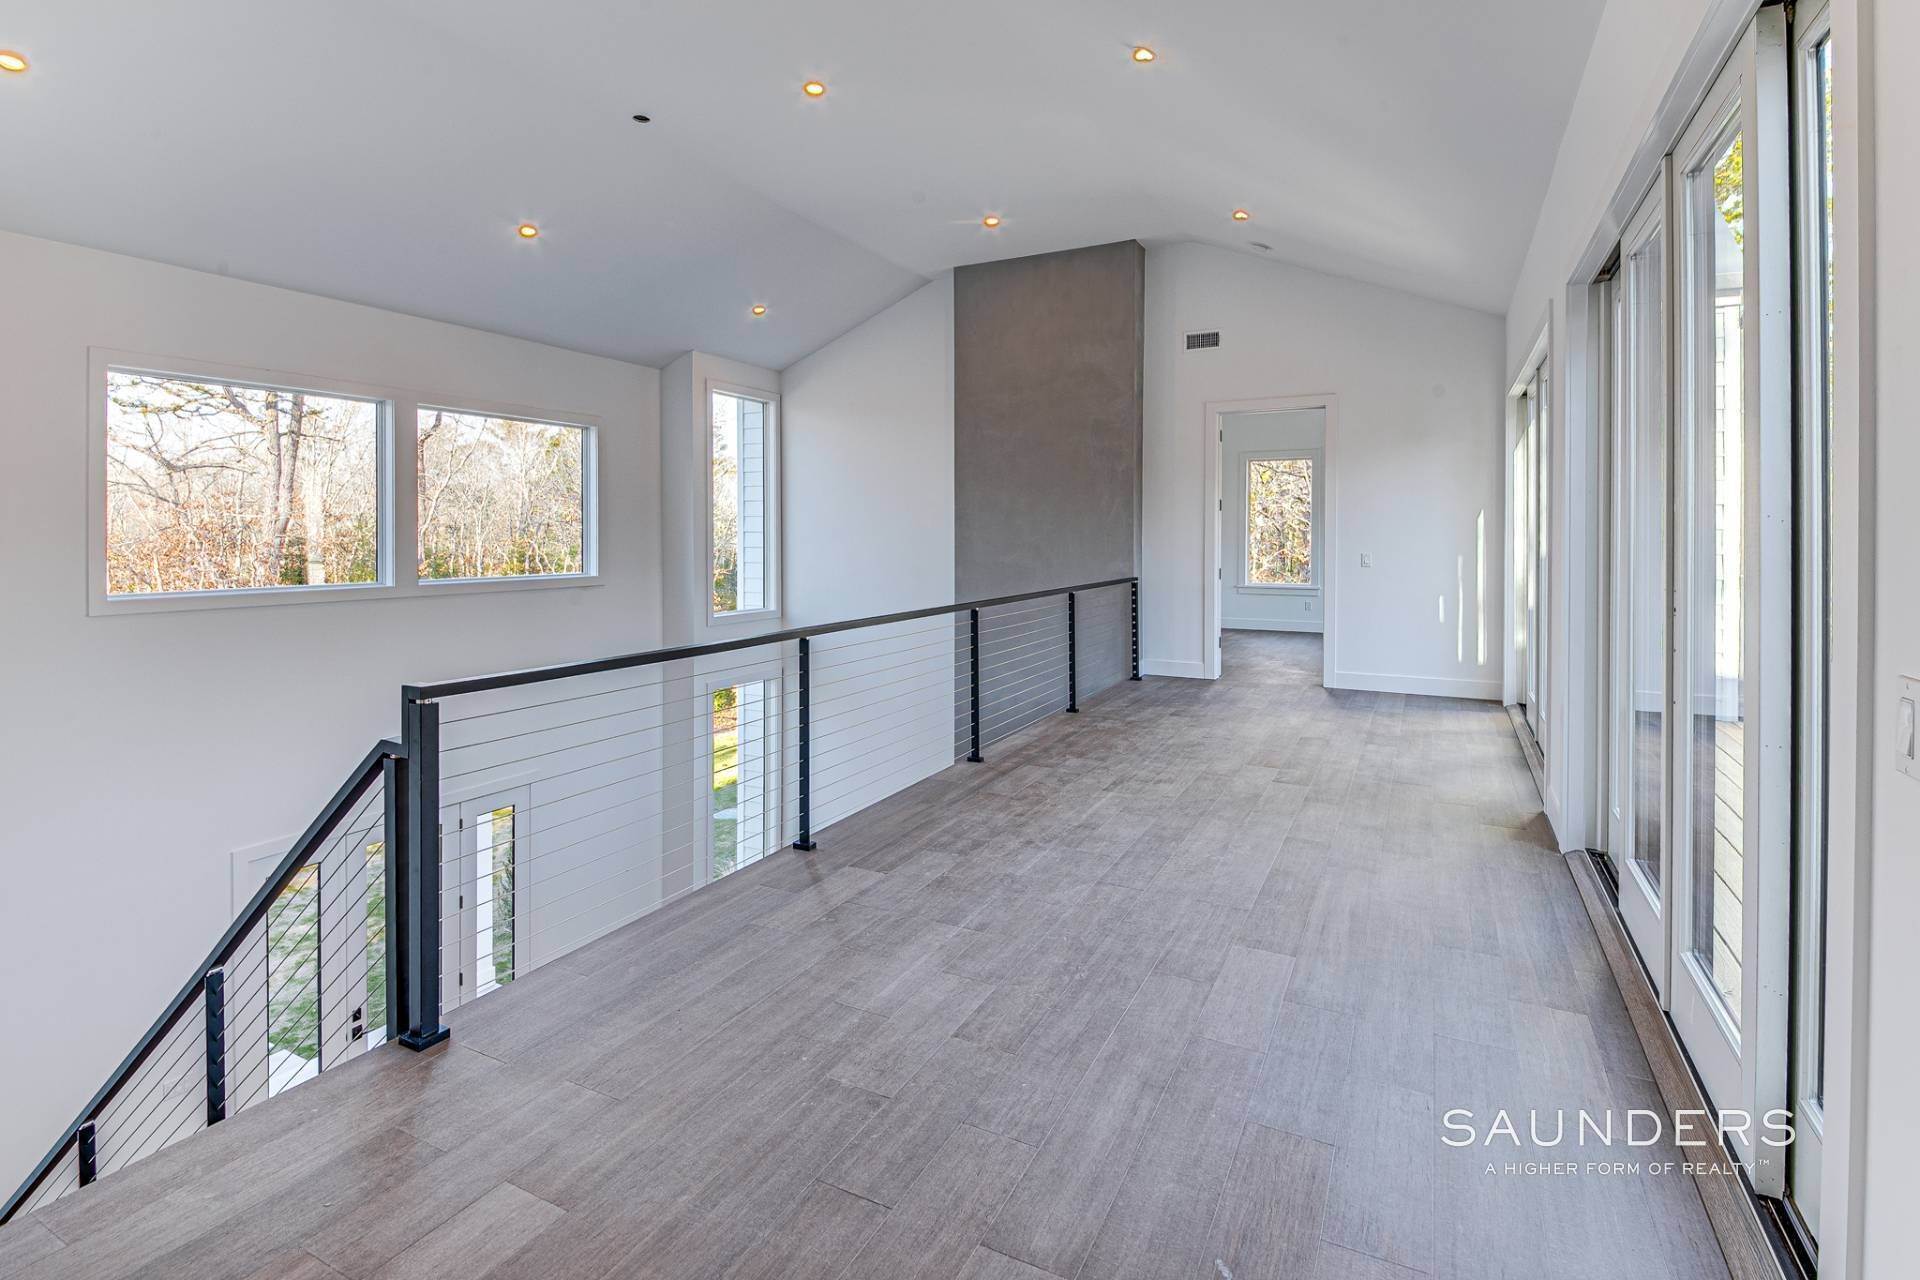 27. Single Family Homes for Sale at Unsurpassed Luxury And Elegance With This Brand New Construction 10 Van Scoys Path, East Hampton, NY 11937